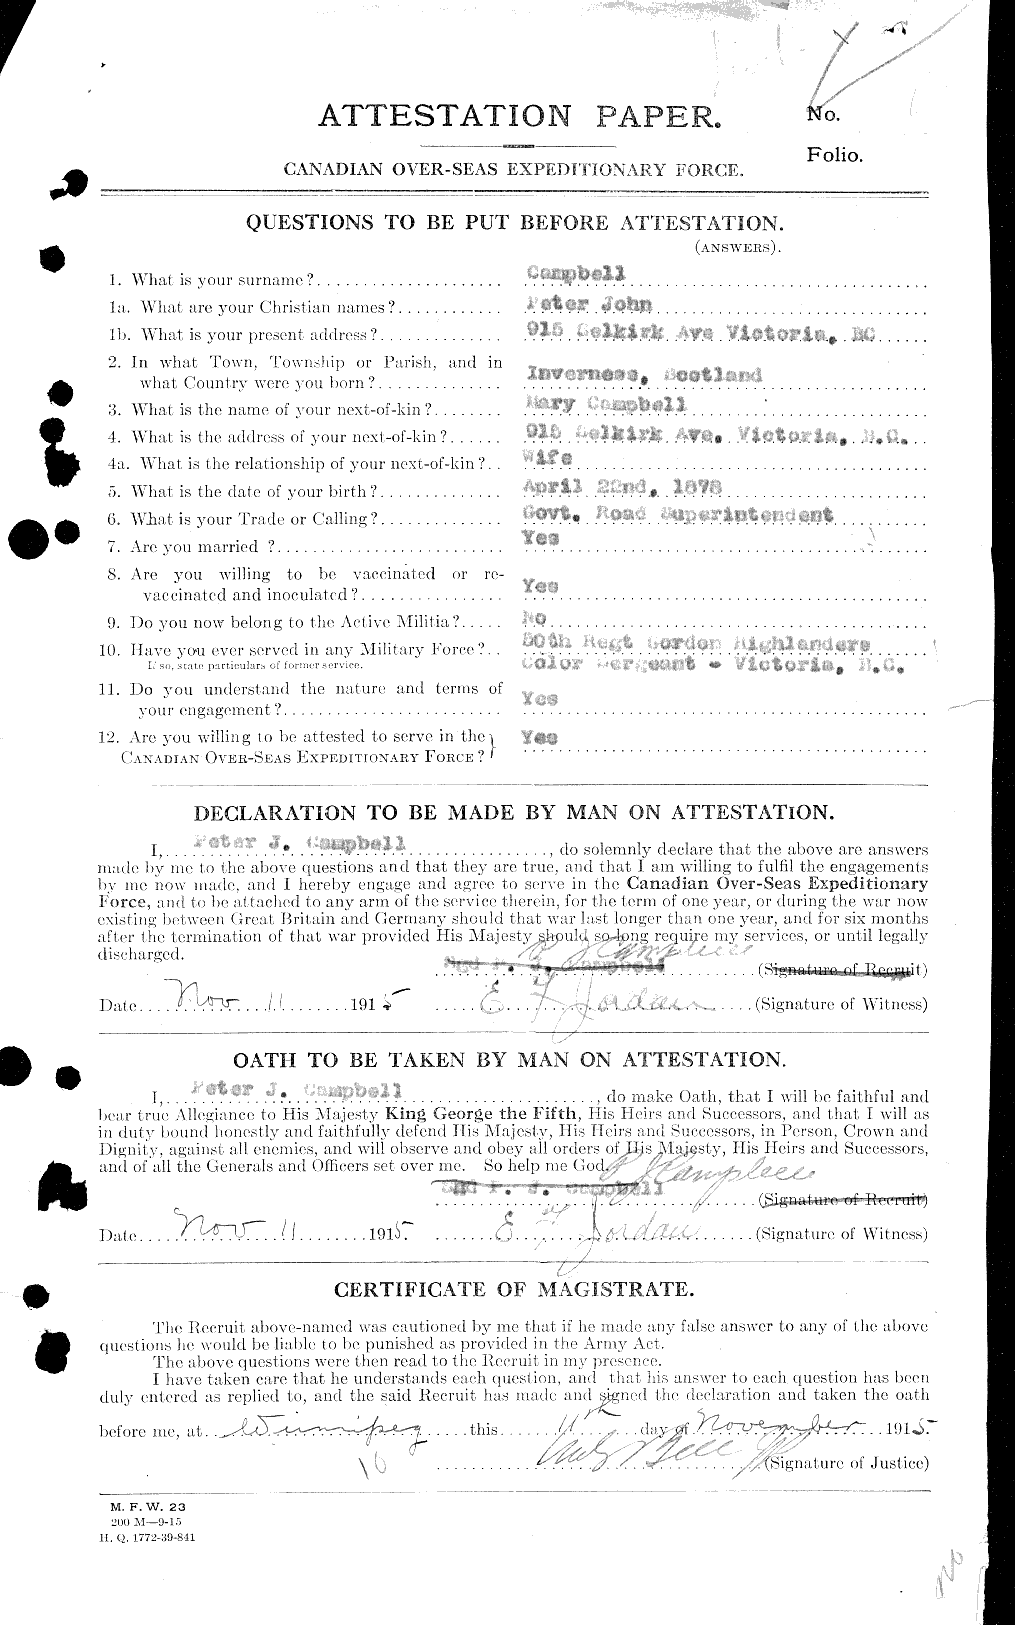 Personnel Records of the First World War - CEF 007020a